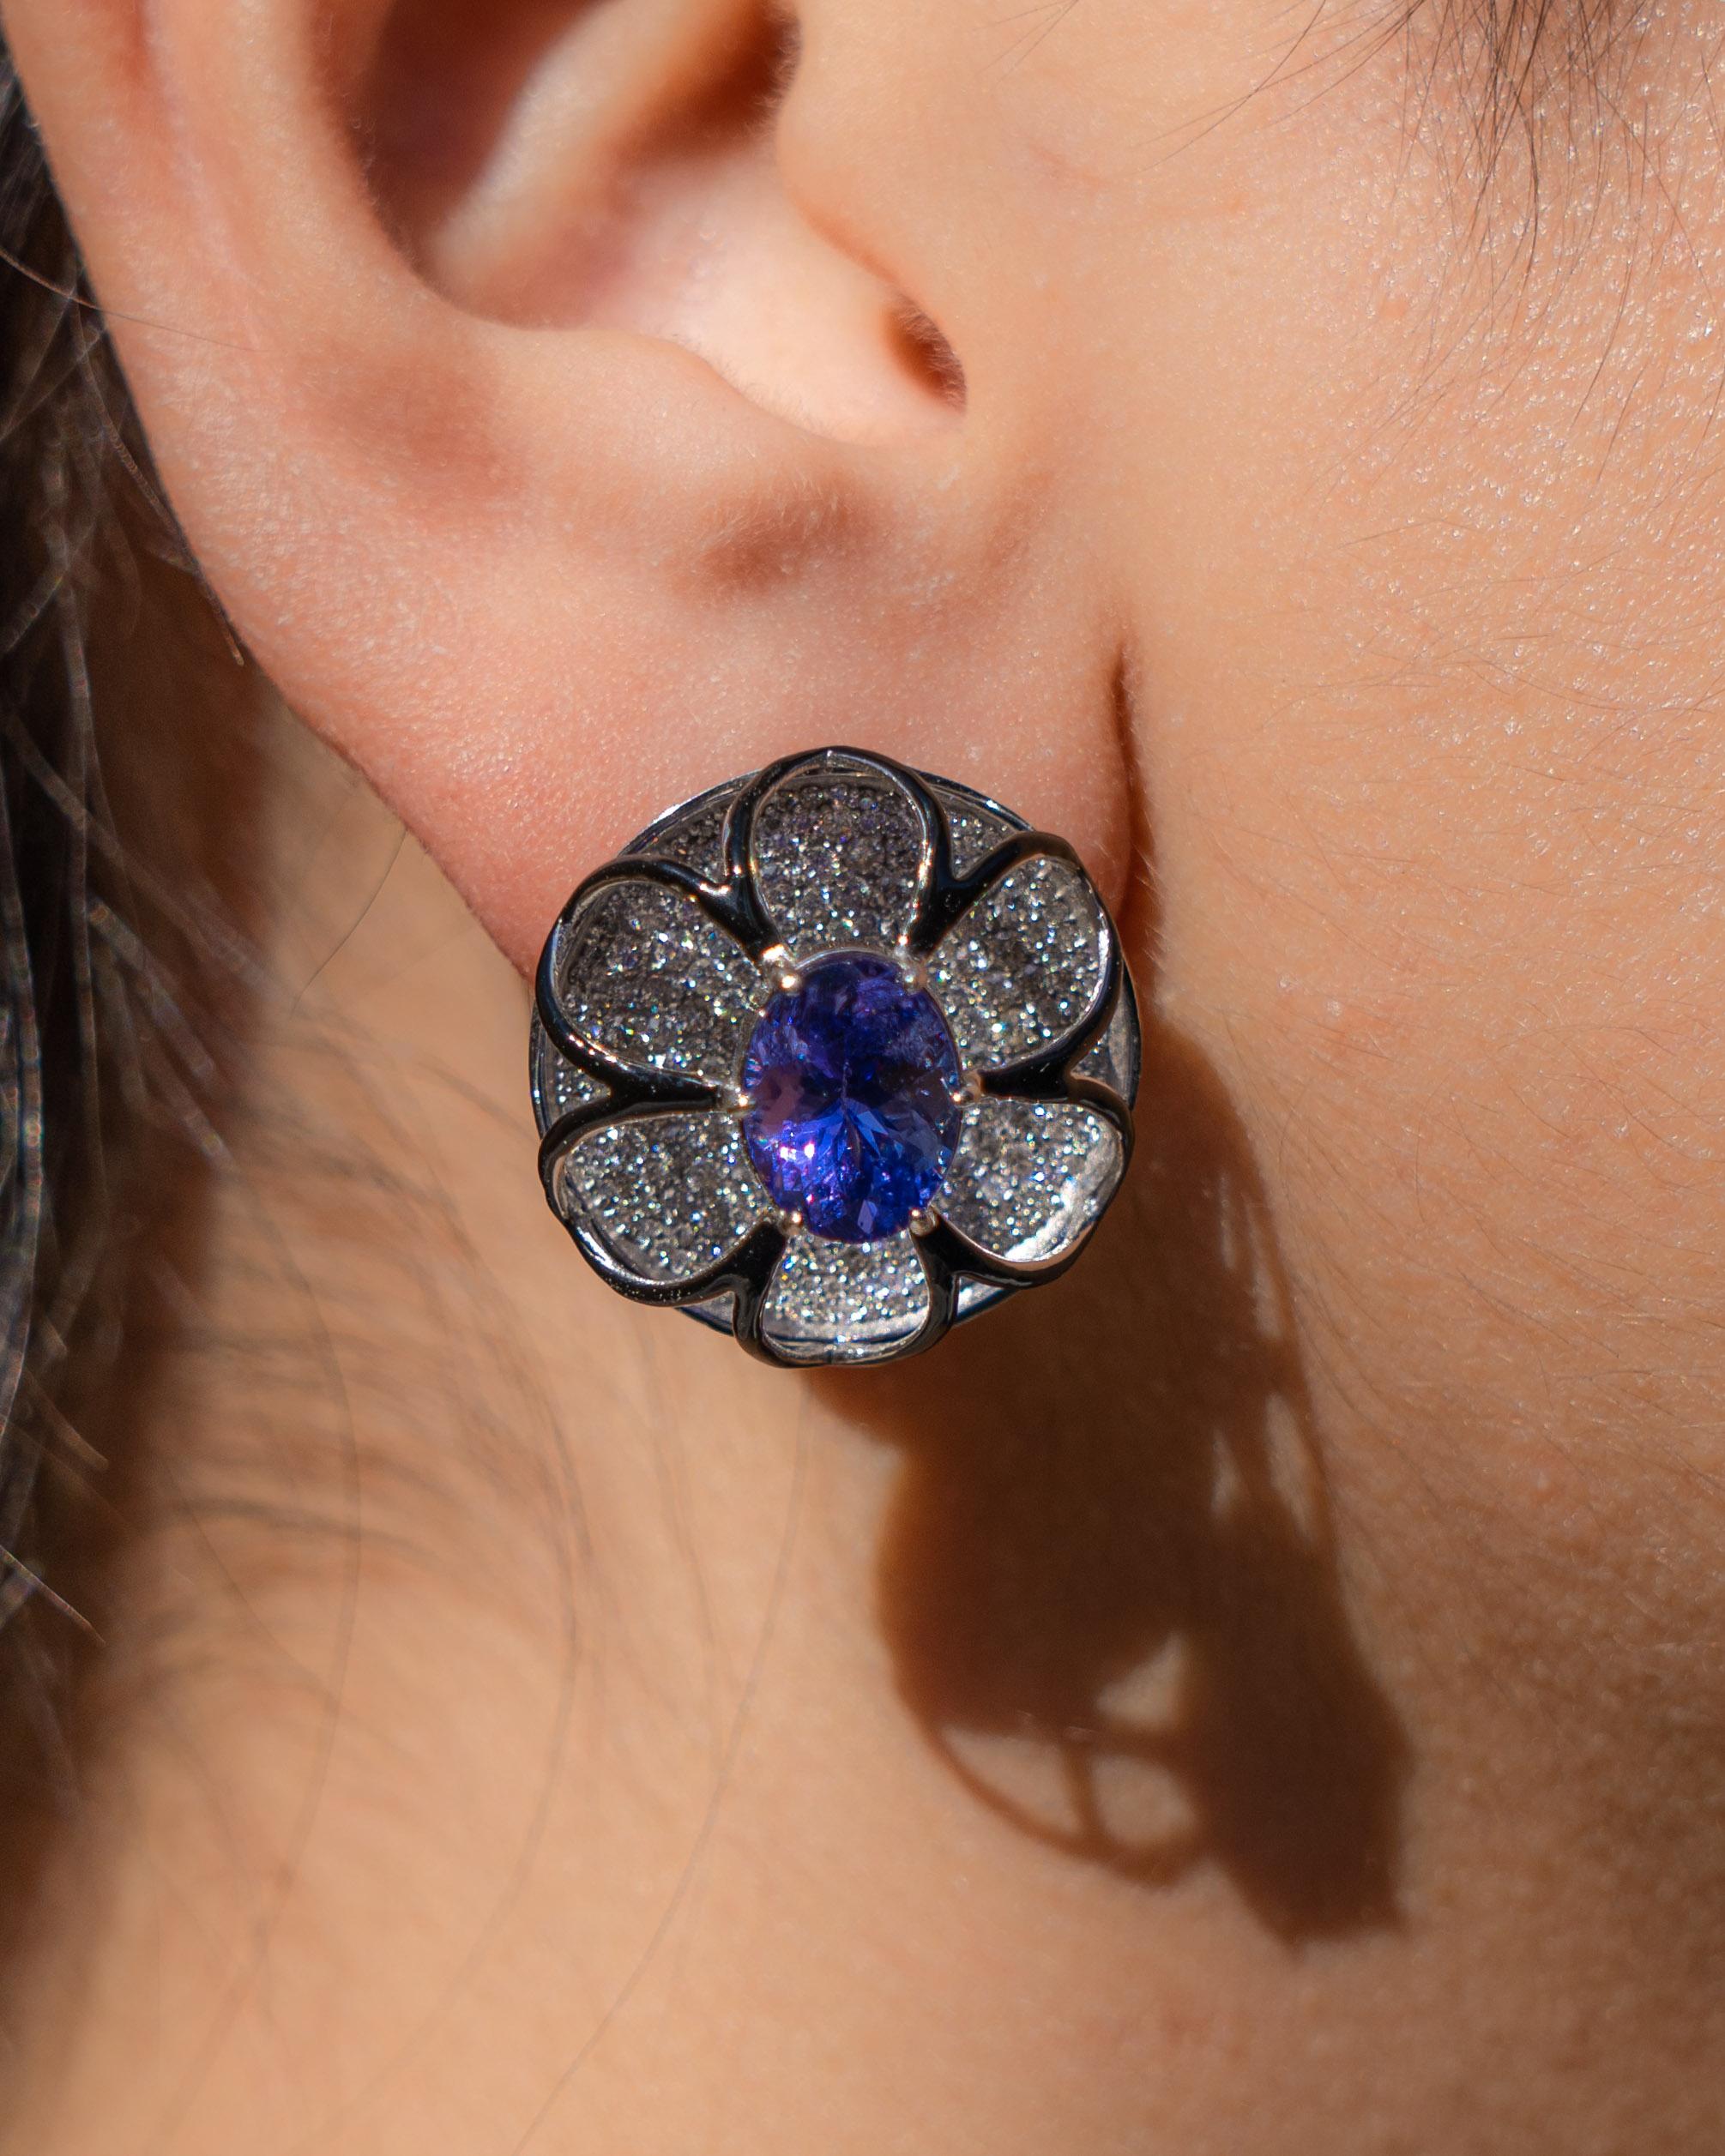 A very unique pair of art-deco 6.01 carat oval shaped Tanzanite and 2.83 carat Diamond studs, with black enamel, all set in solid 18K White Gold. The earrings come with an omega clip, making it a secure fastening. 
We provide free shipping, and we